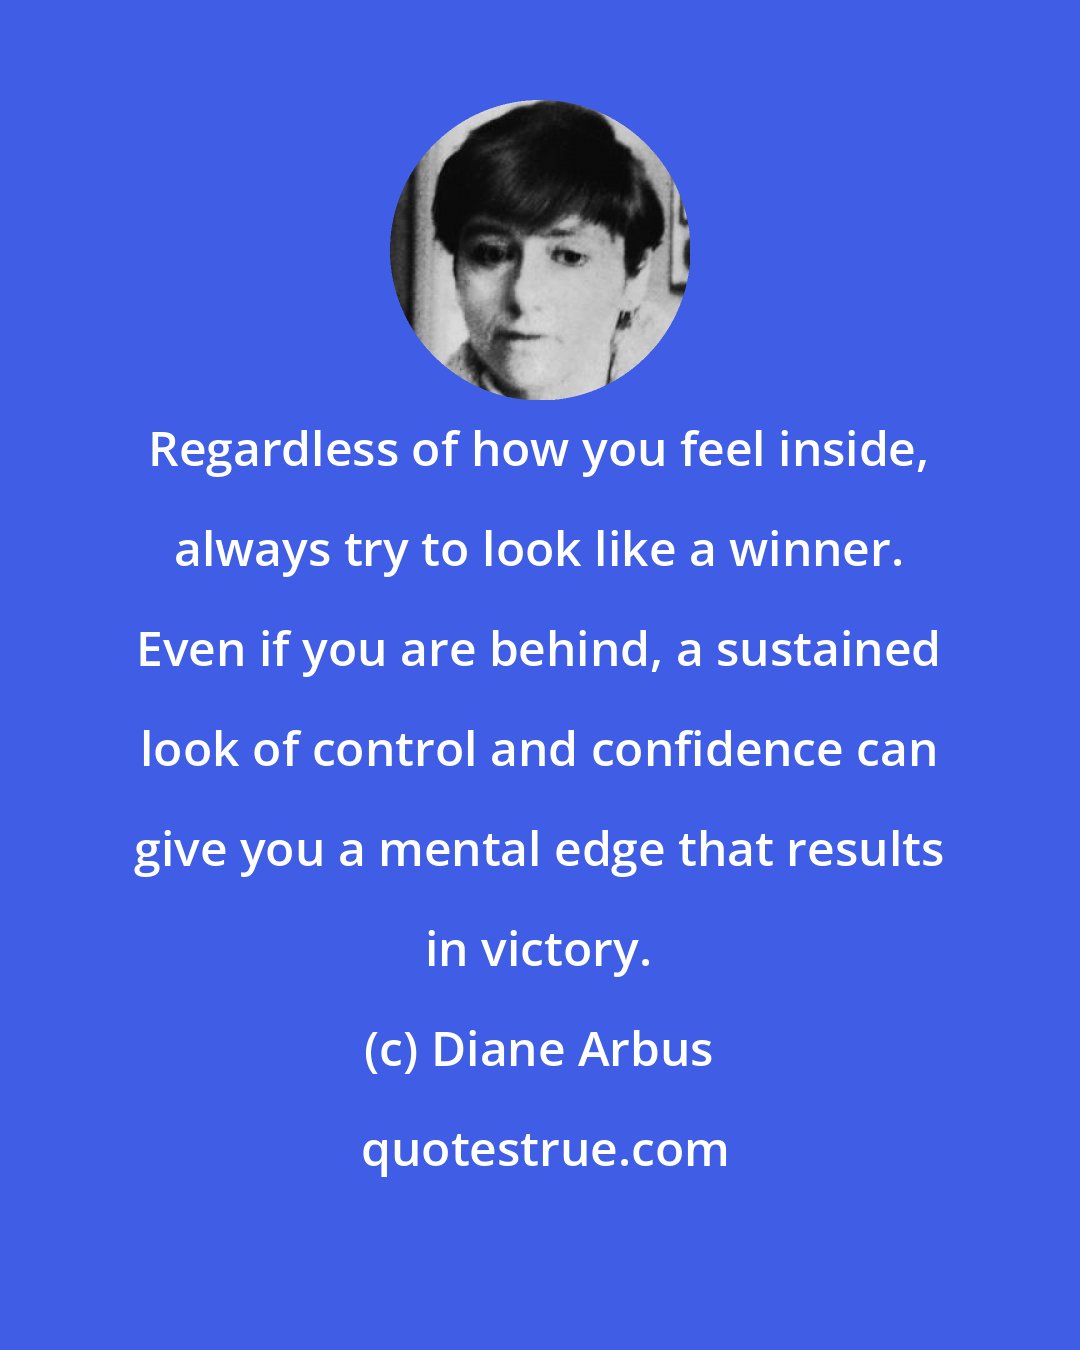 Diane Arbus: Regardless of how you feel inside, always try to look like a winner. Even if you are behind, a sustained look of control and confidence can give you a mental edge that results in victory.